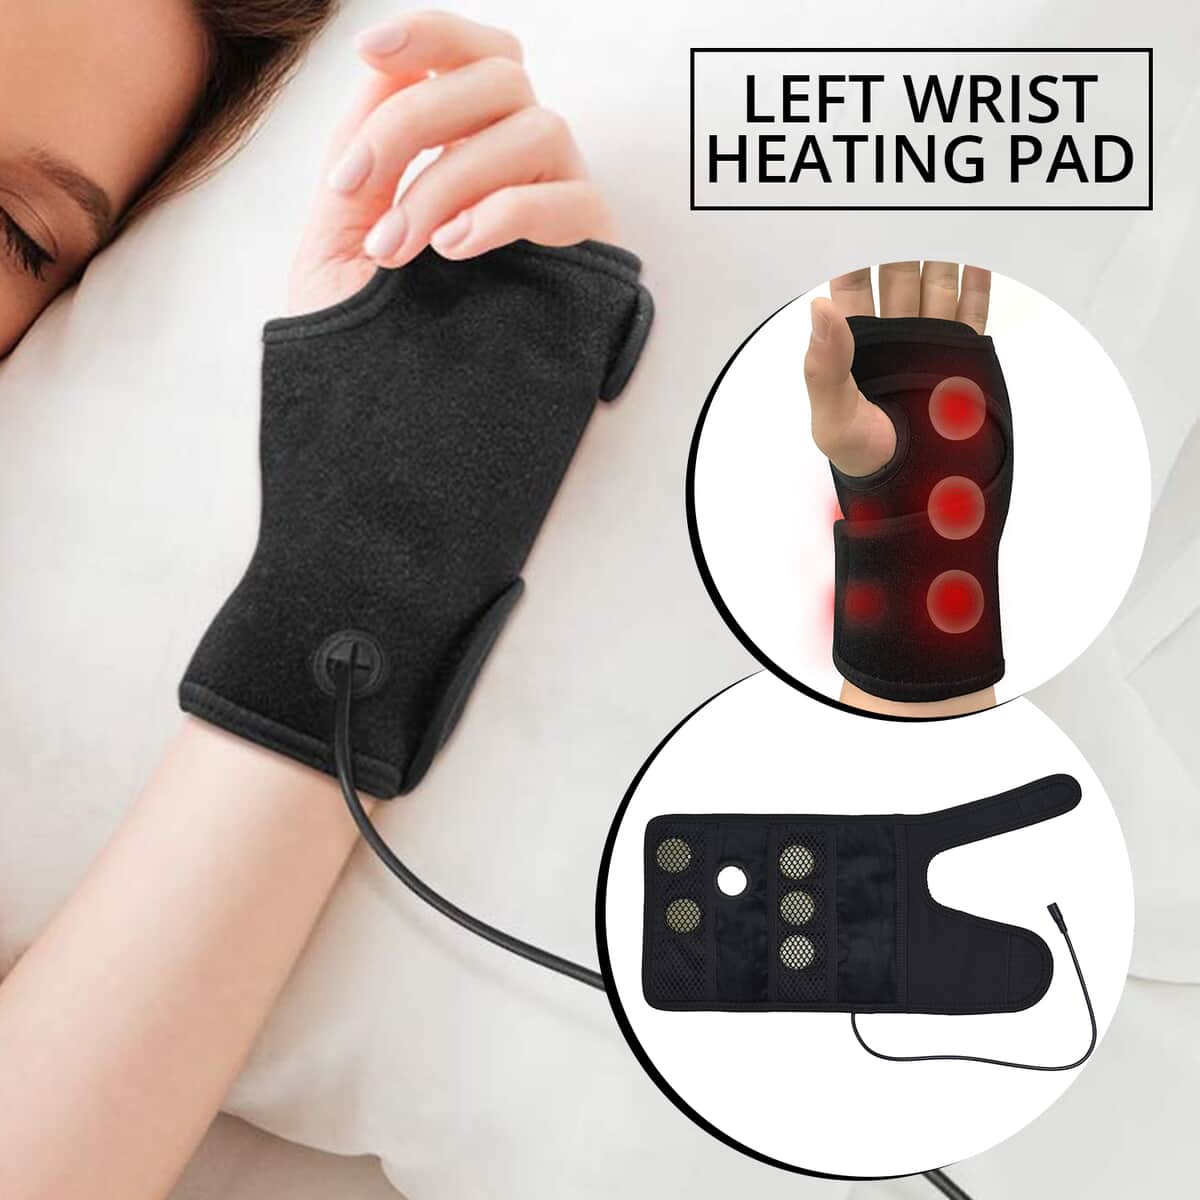 UTK DC Natural Jade Wrist Heating Pad Wraps for Carpal Tunnel (Left) (8.2"X15") with Faux Leather and PP Cotton image number 1